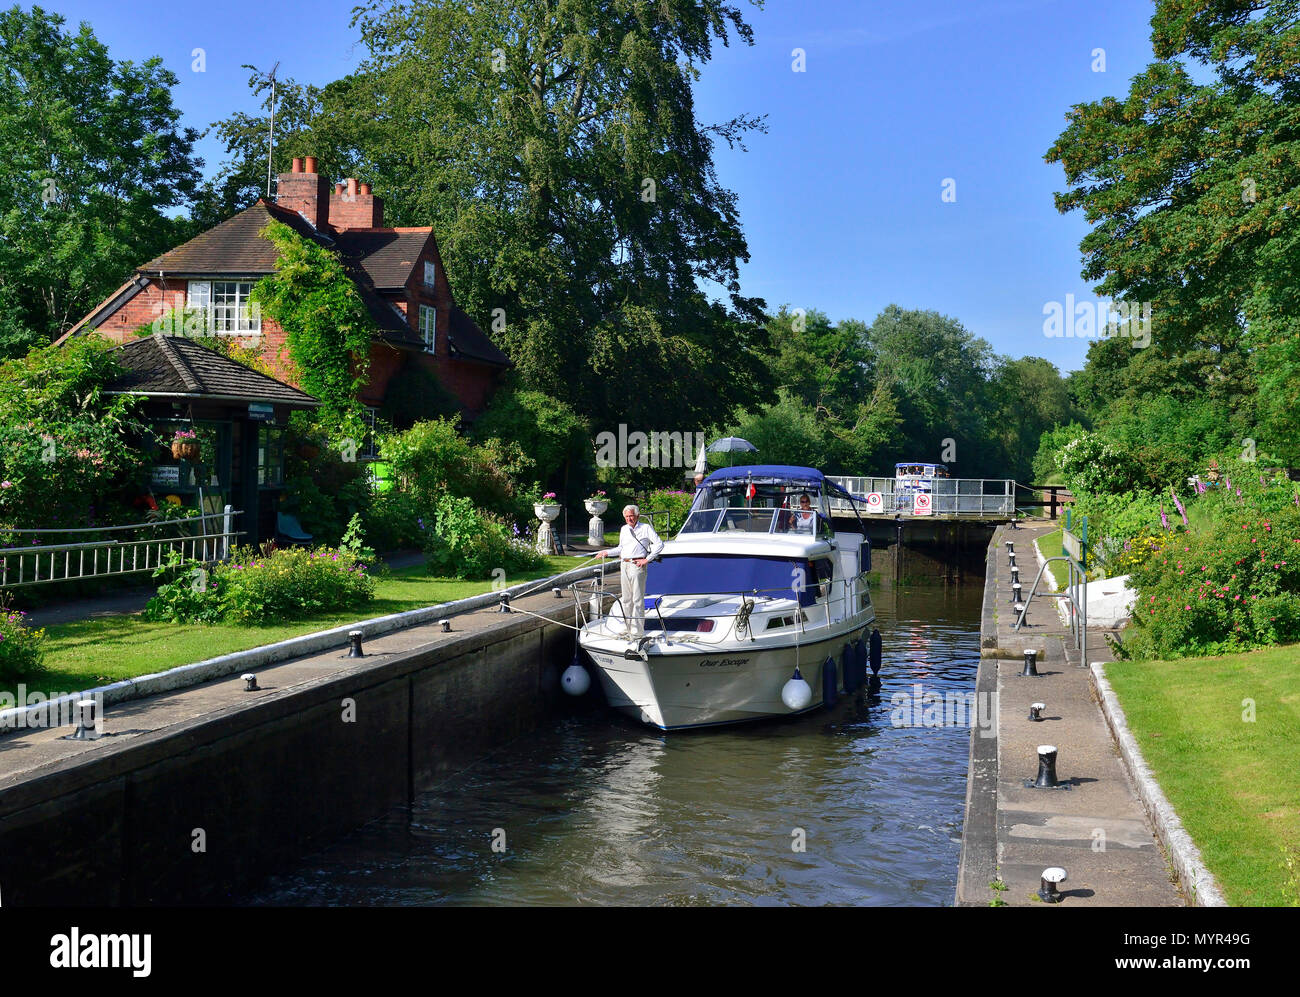 Private pleasure boat entering the Sonning Lock on the River Thames in the village of Sonning,Reading, Berkshire,on a beauiful sunny summers afternoon Stock Photo